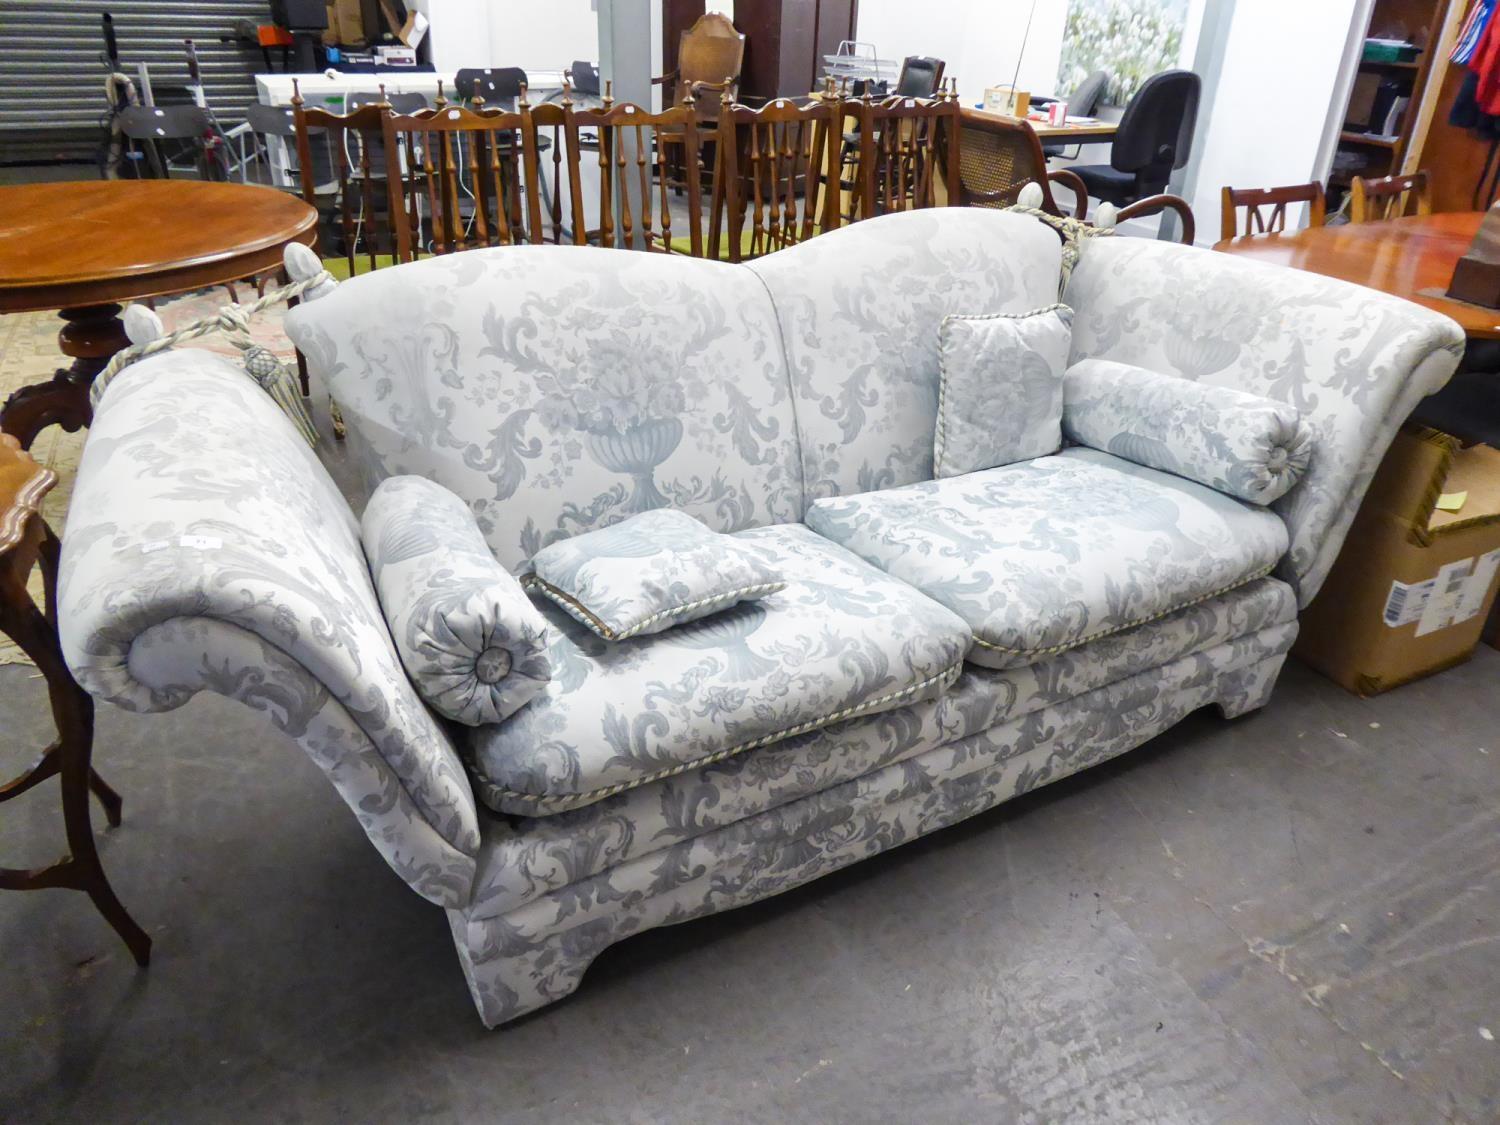 DERWENT KNOLL SETTEE COVERED IN GREY FOLIATE SCROLL DAMASK